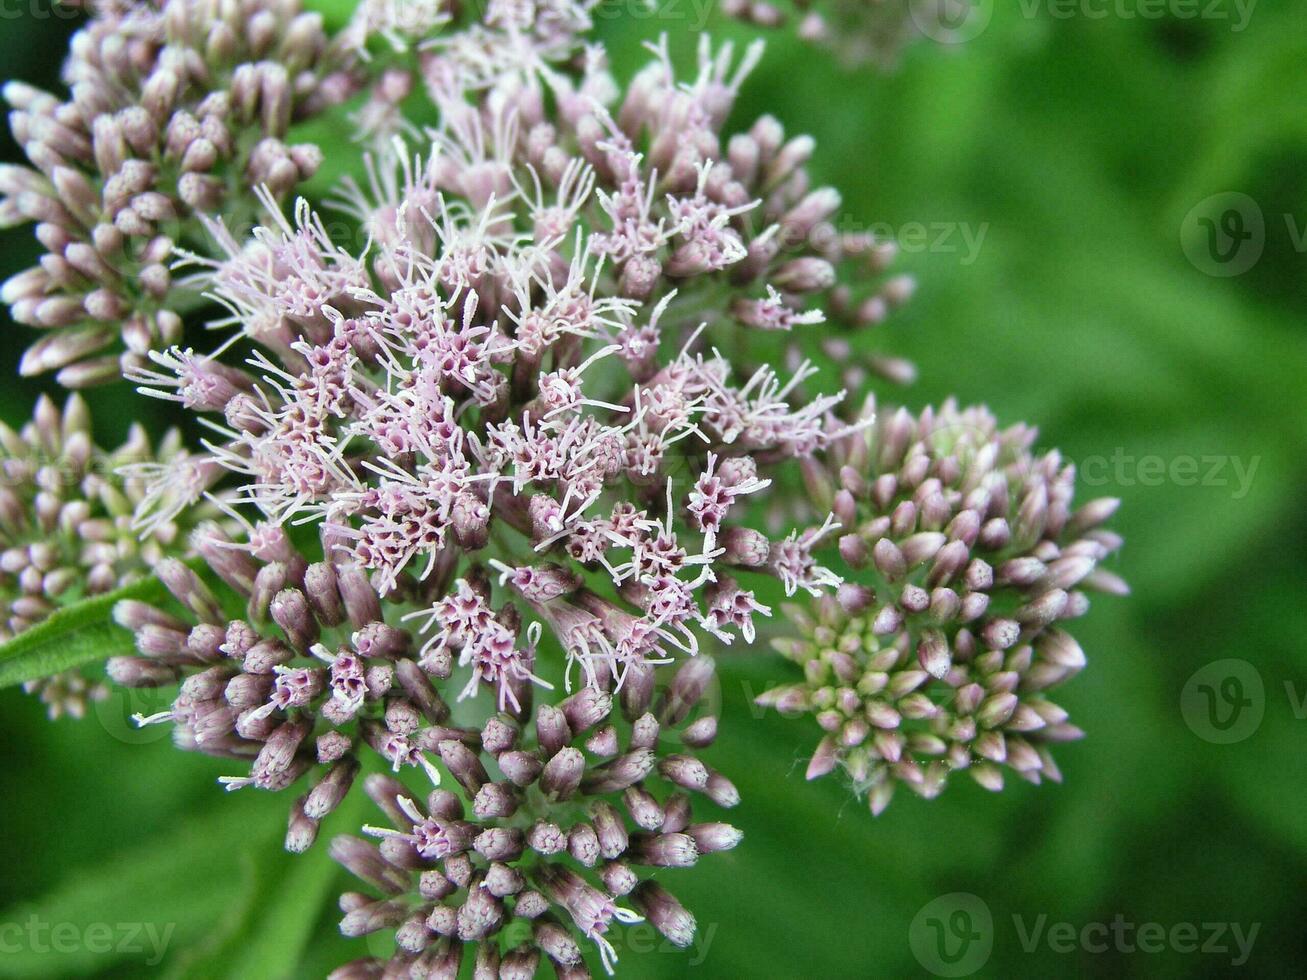 Pink fluffy flowers Eupatorium cannabinum, hemp-agrimony or holy rope growing on meadow. Honey and medicinal plants in Europe. drug plants photo